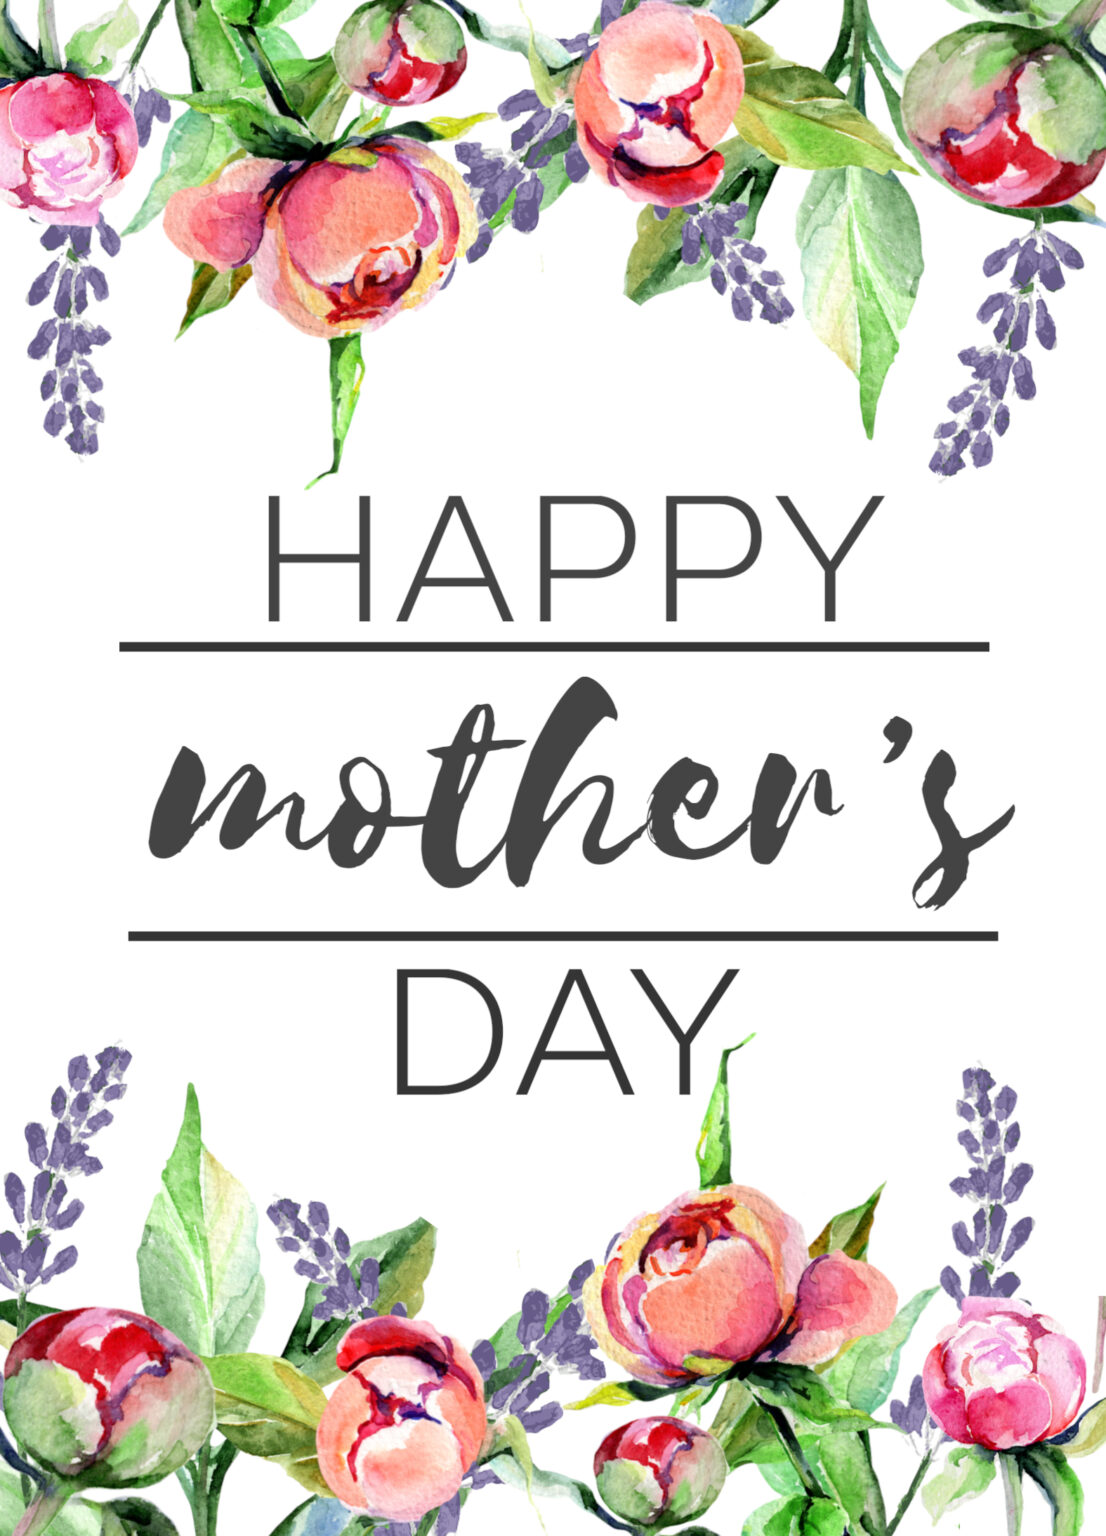 Free Printable Mother's Day Cards Paper Trail Design